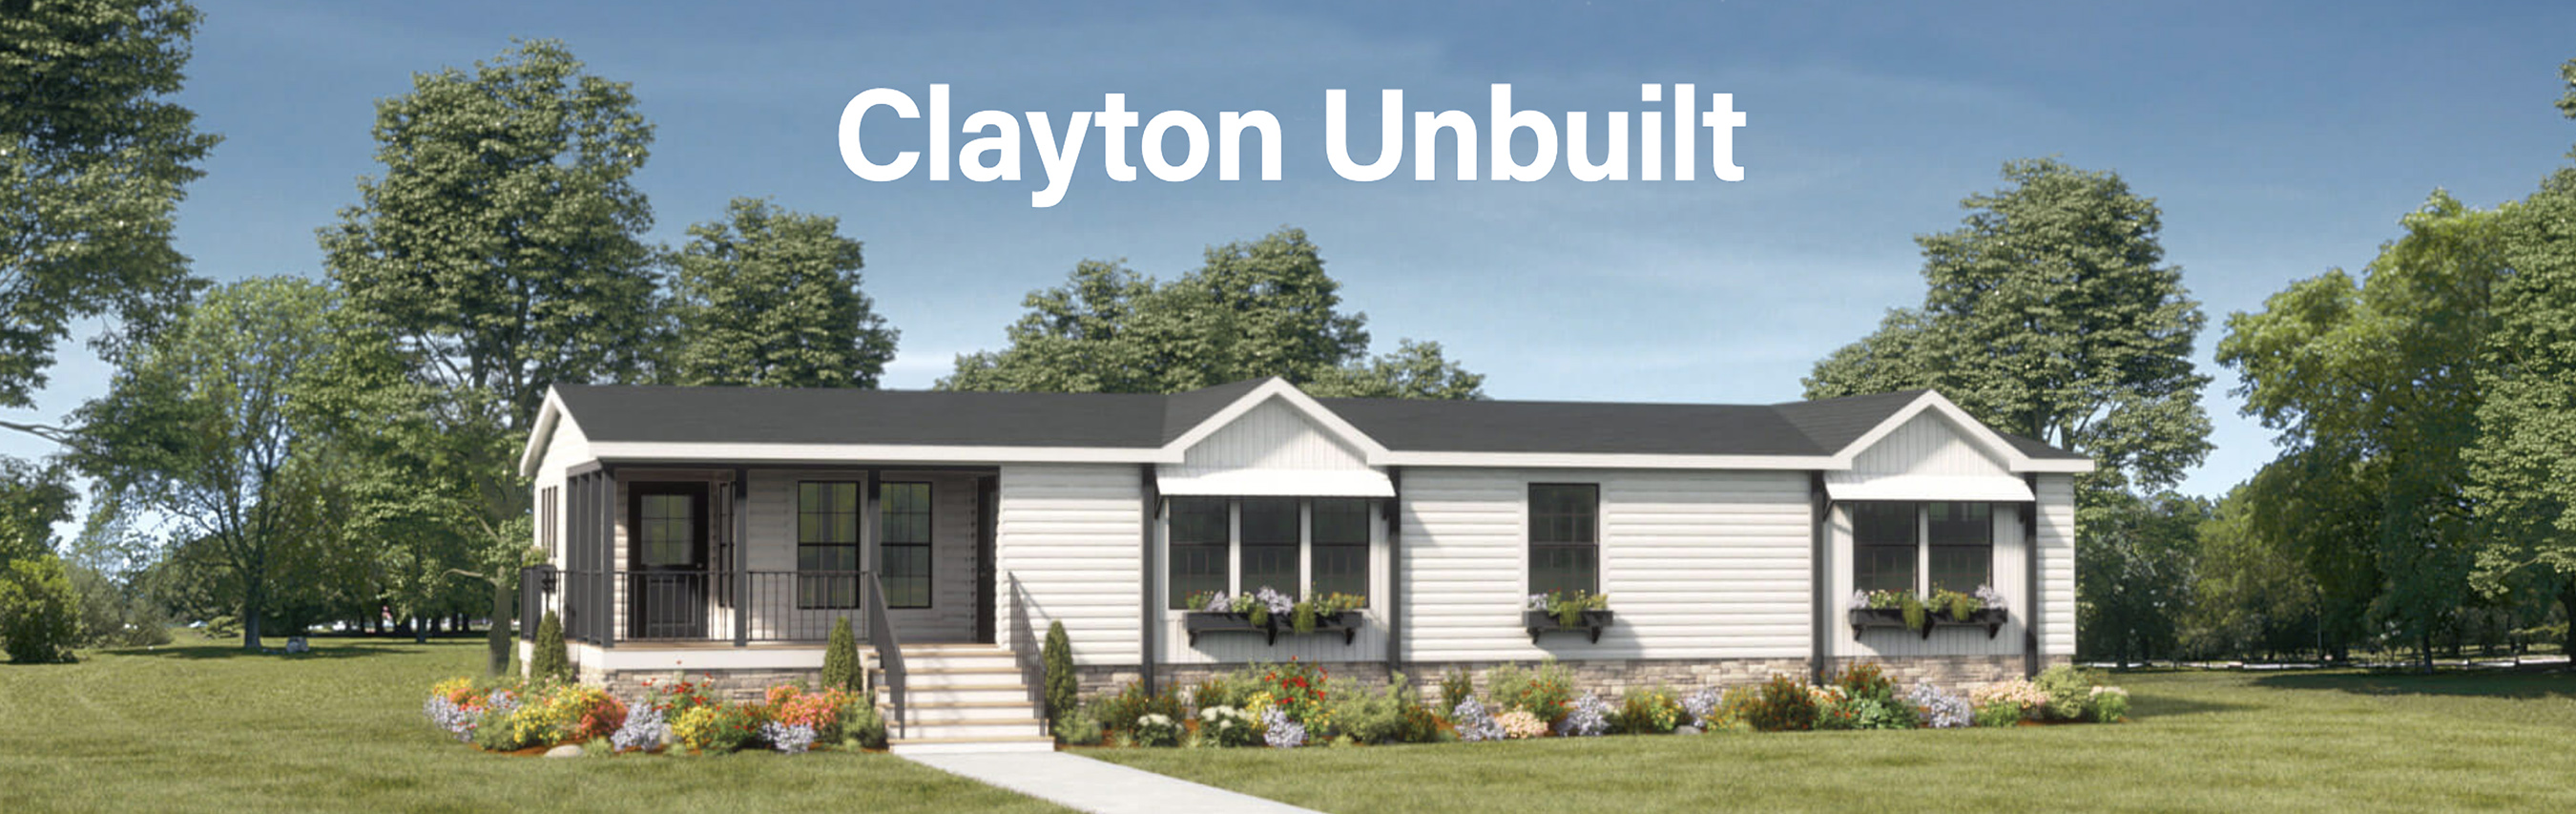 Clayton Home, with caption of "Clayton Unbuilt"